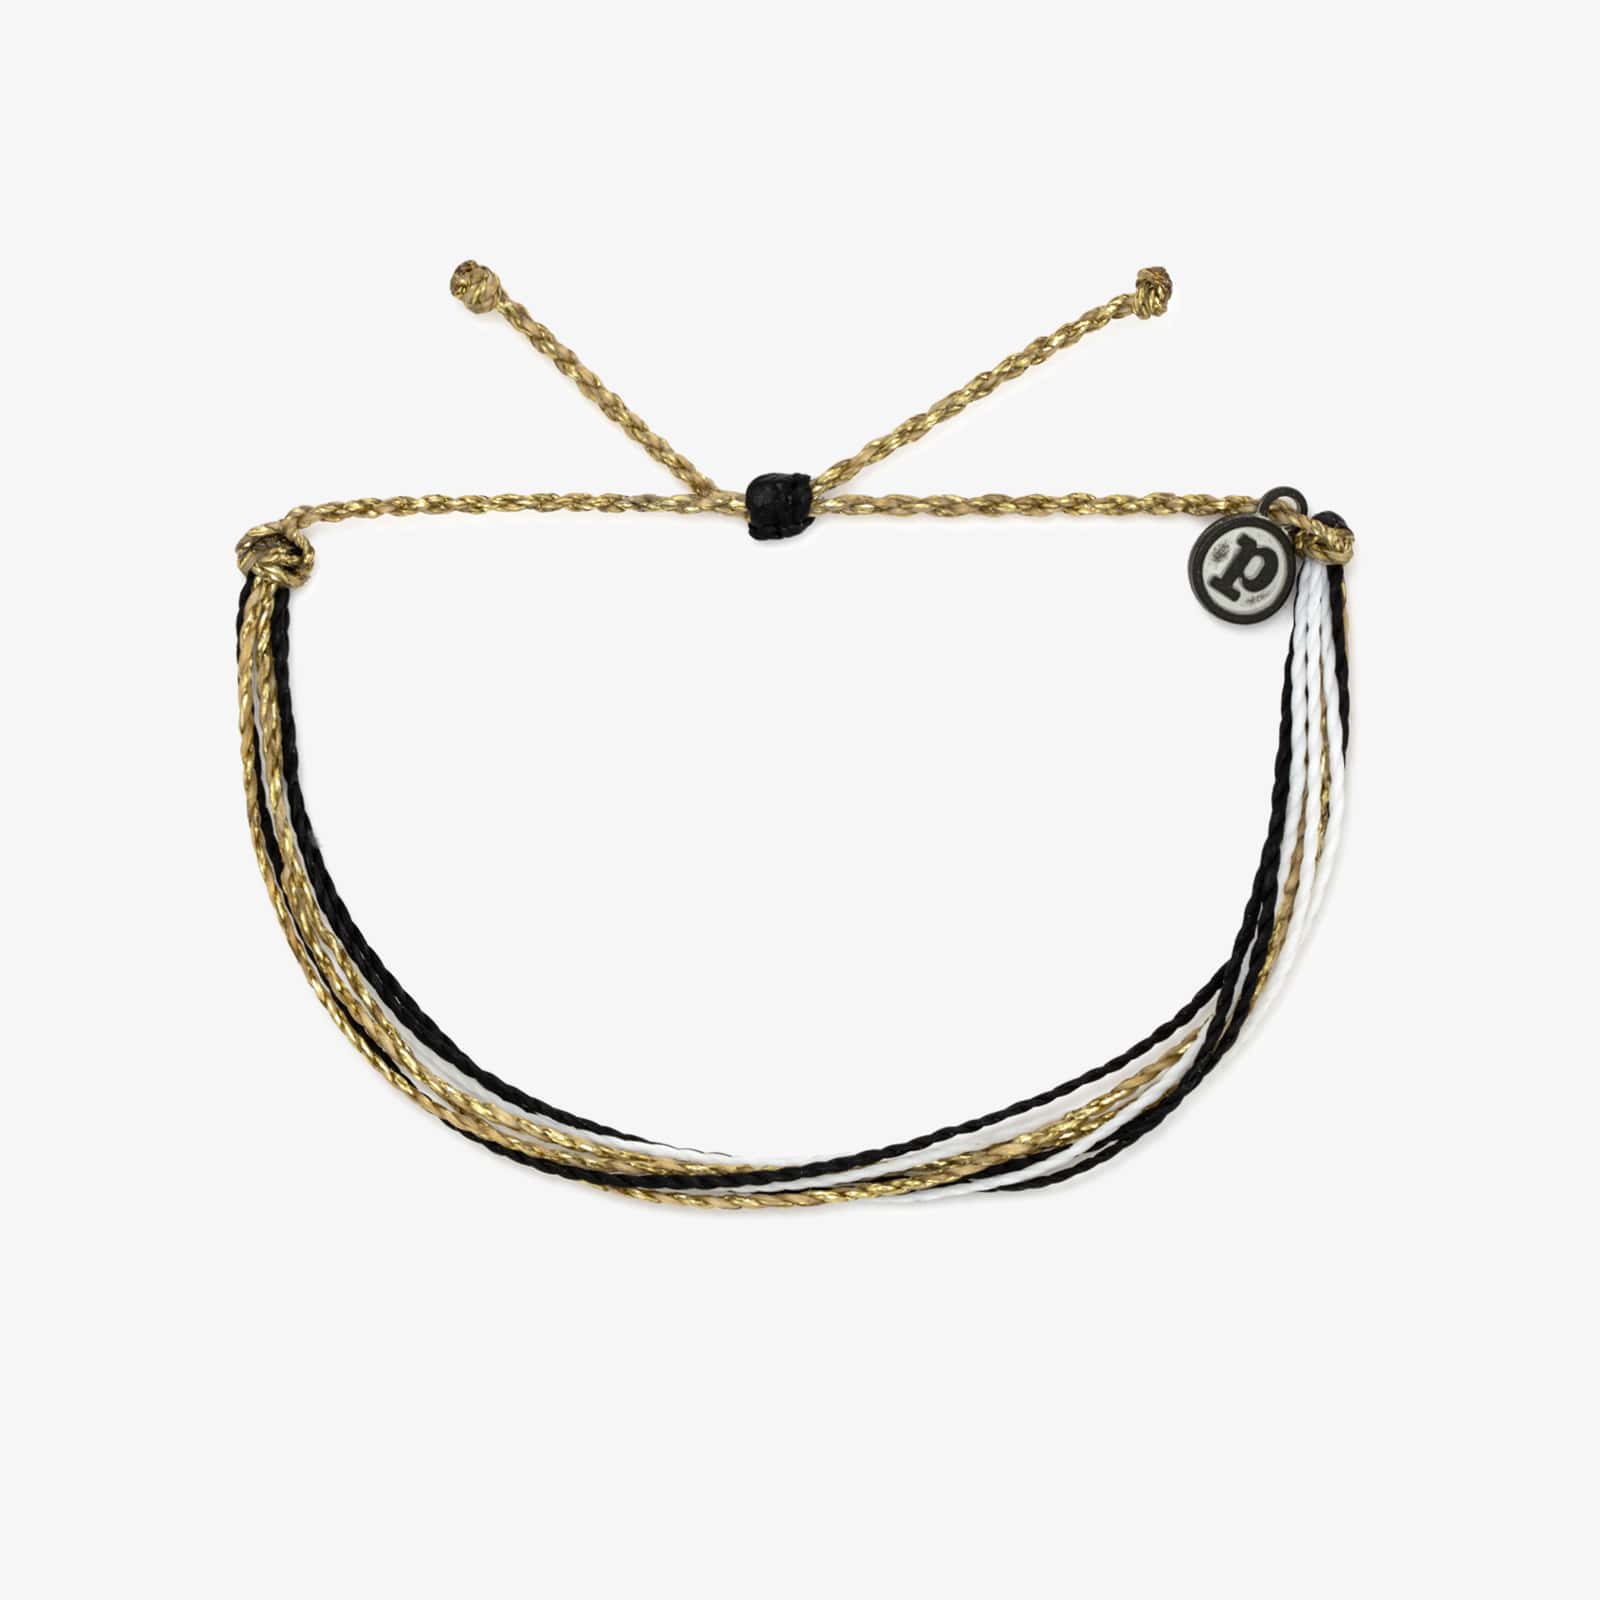 Buy Round Braided 6 Strand Top Handle Purse Strap Online in India